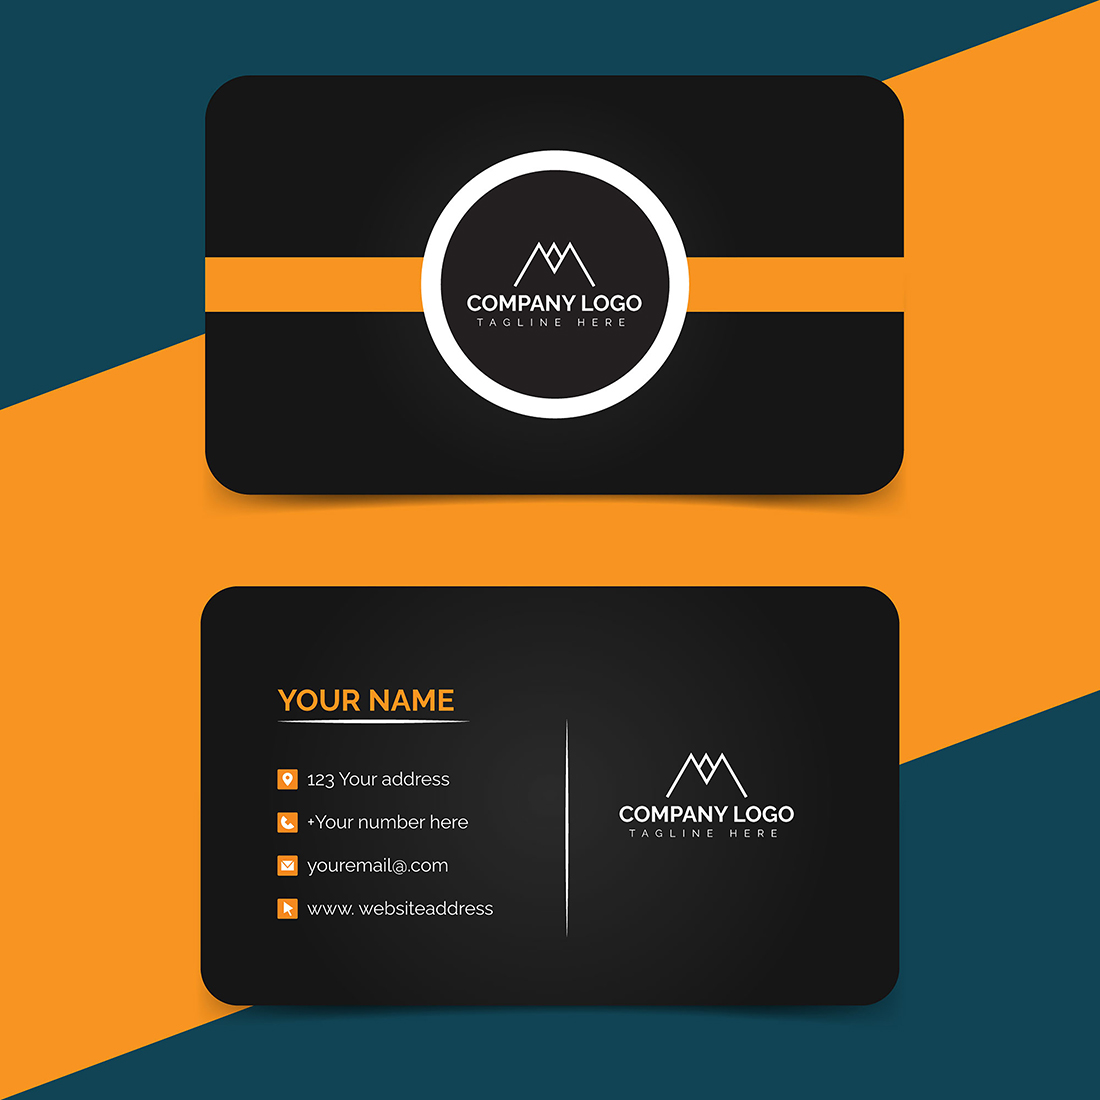 Black and yellow business card with a circular logo.